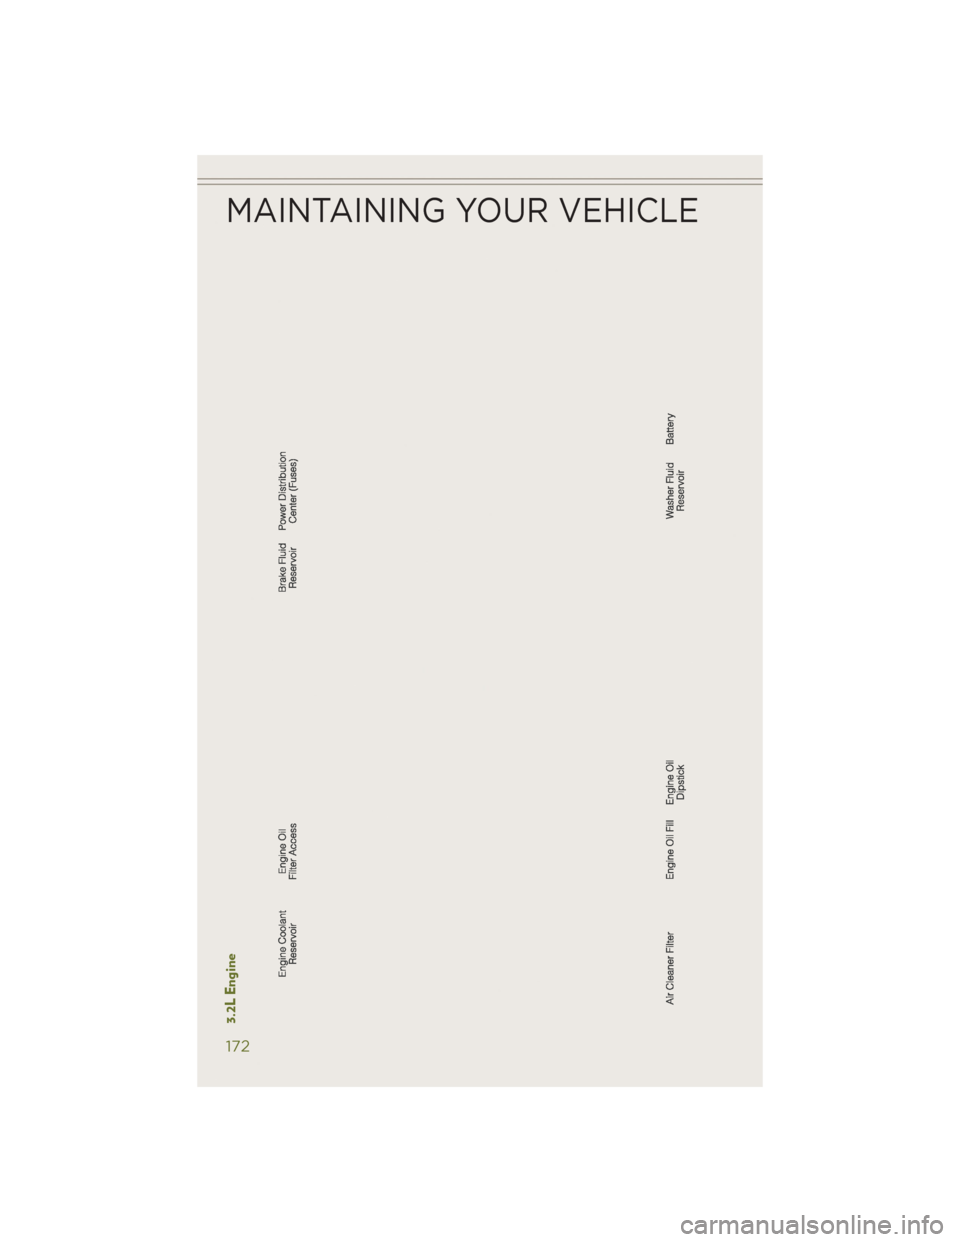 JEEP CHEROKEE 2014 KL / 5.G User Guide 3.2L Engine
MAINTAINING YOUR VEHICLE
172 